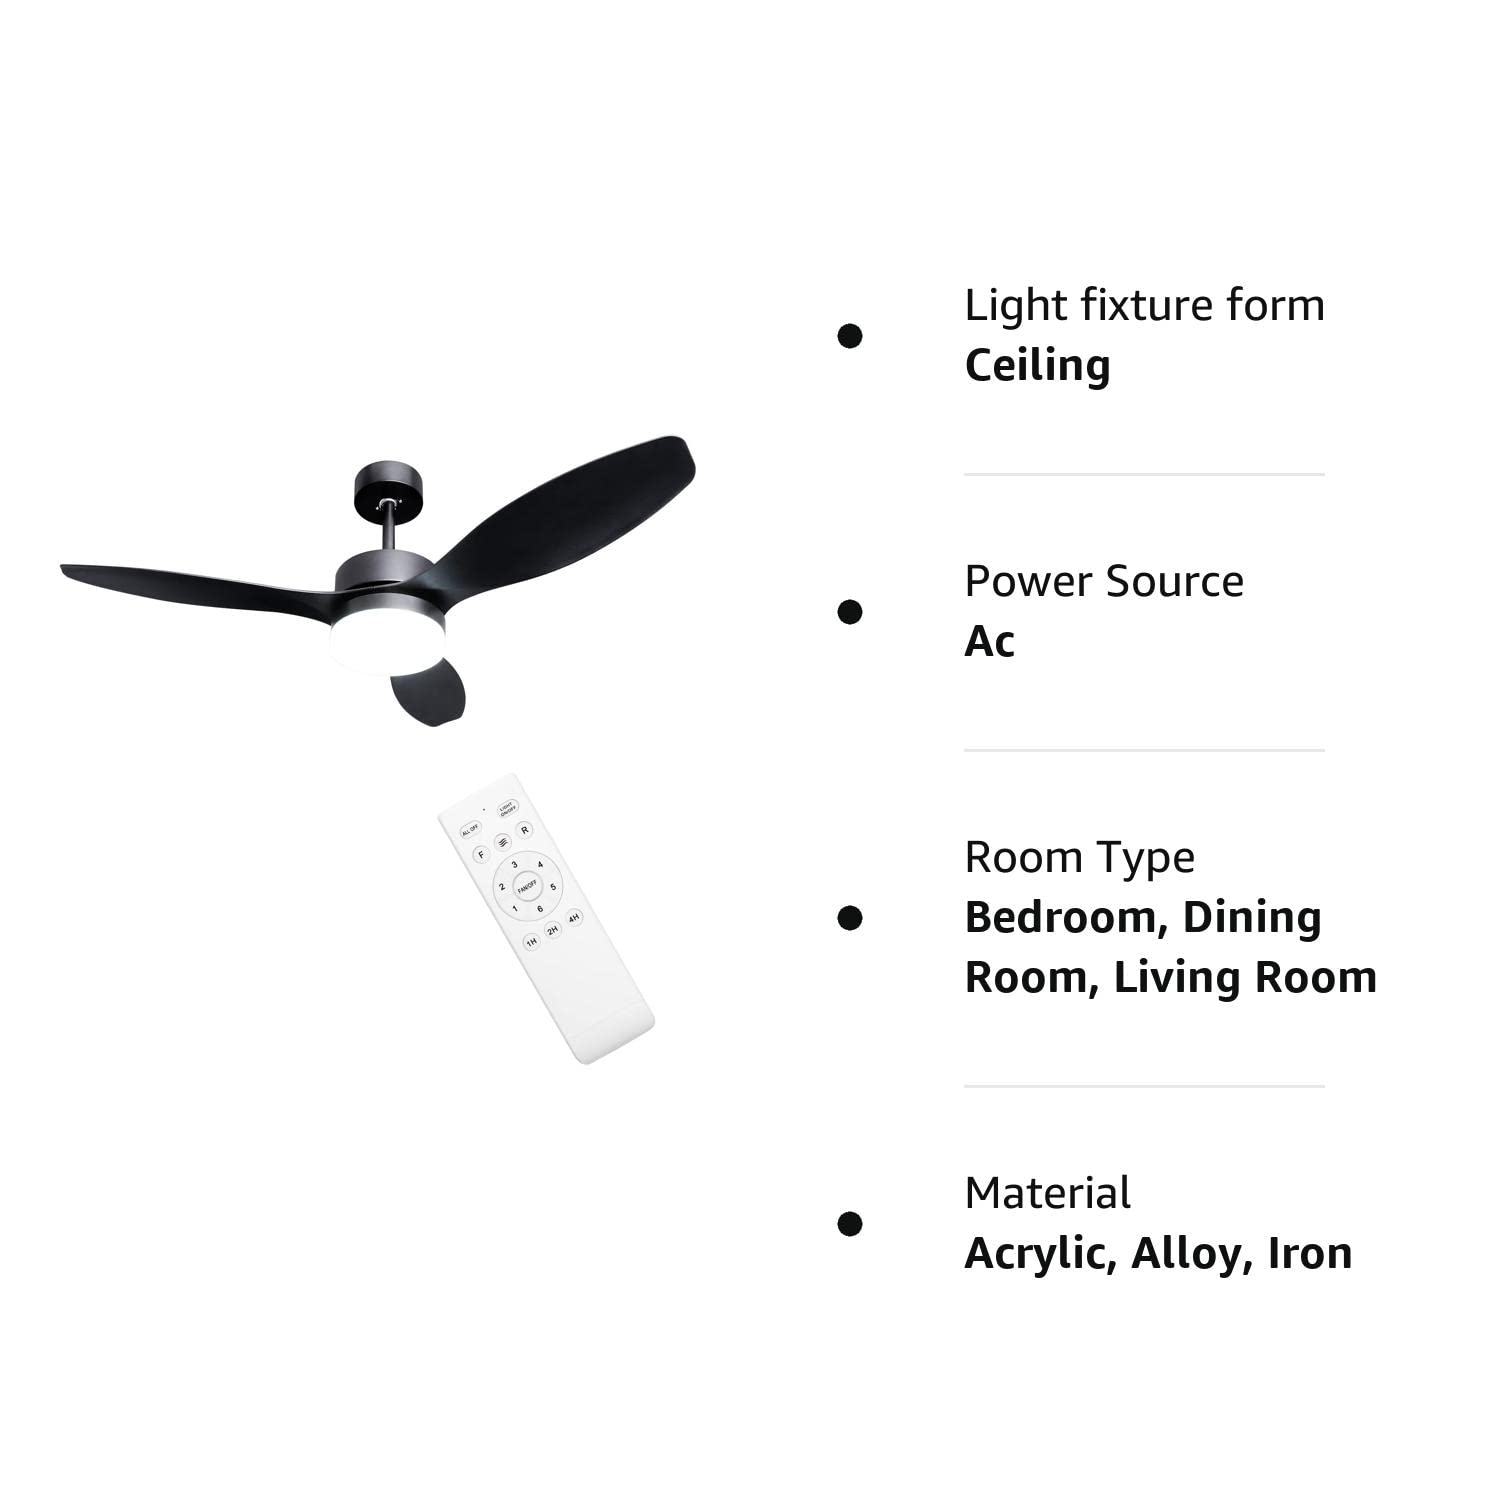 Ohniyou 52'' Ceiling Fan with Lights Remote Control,Outdoor Ceiling Fans for Patio with Light,Black Ceiling Fan Light for Bedroom Kitchen Nursery Conference